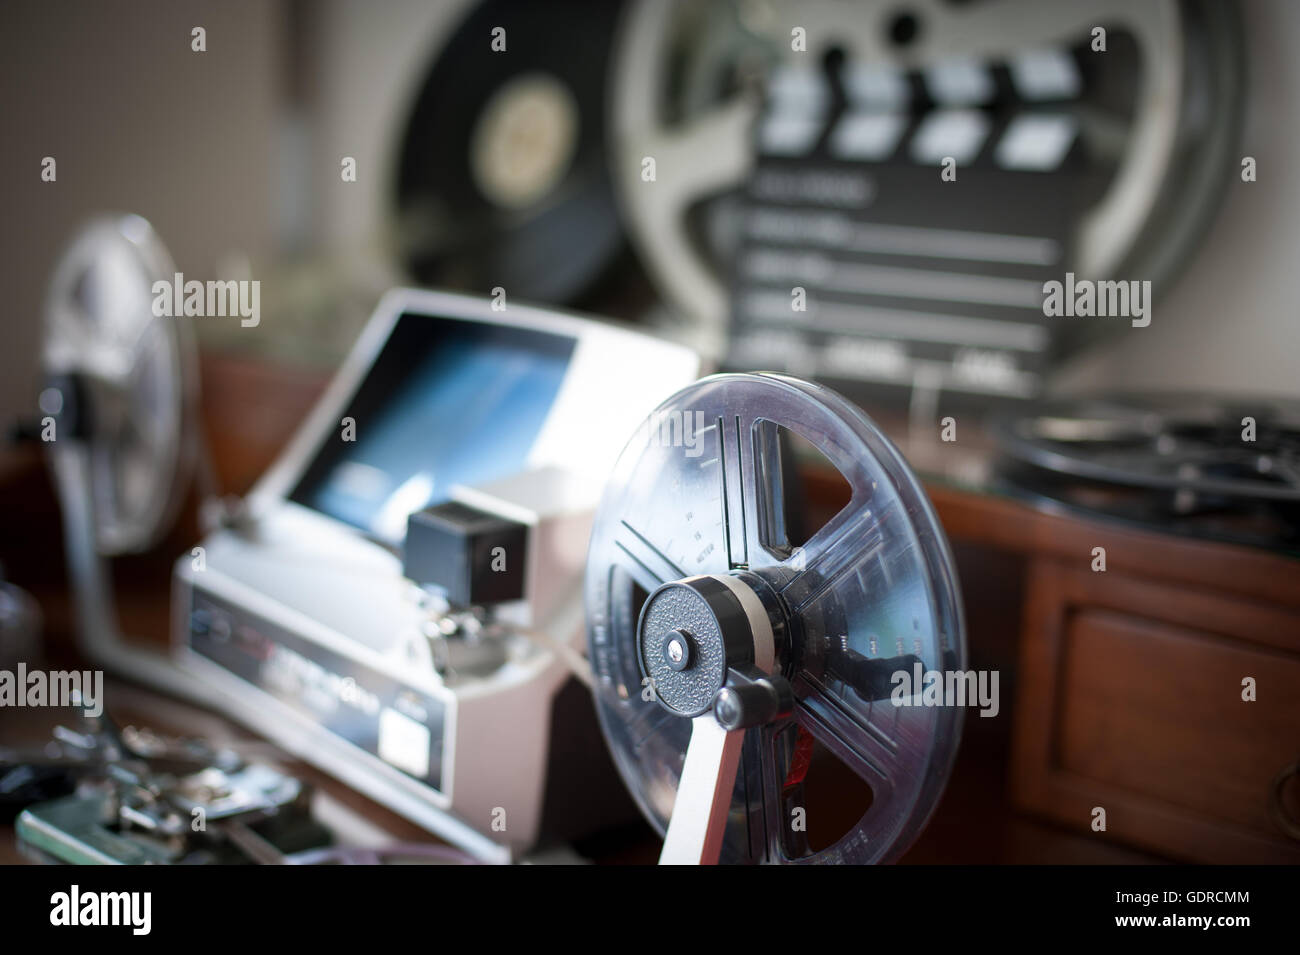 Super 8mm reel detail with desktop workspace for vintage movie editing out  of focus in background Stock Photo - Alamy